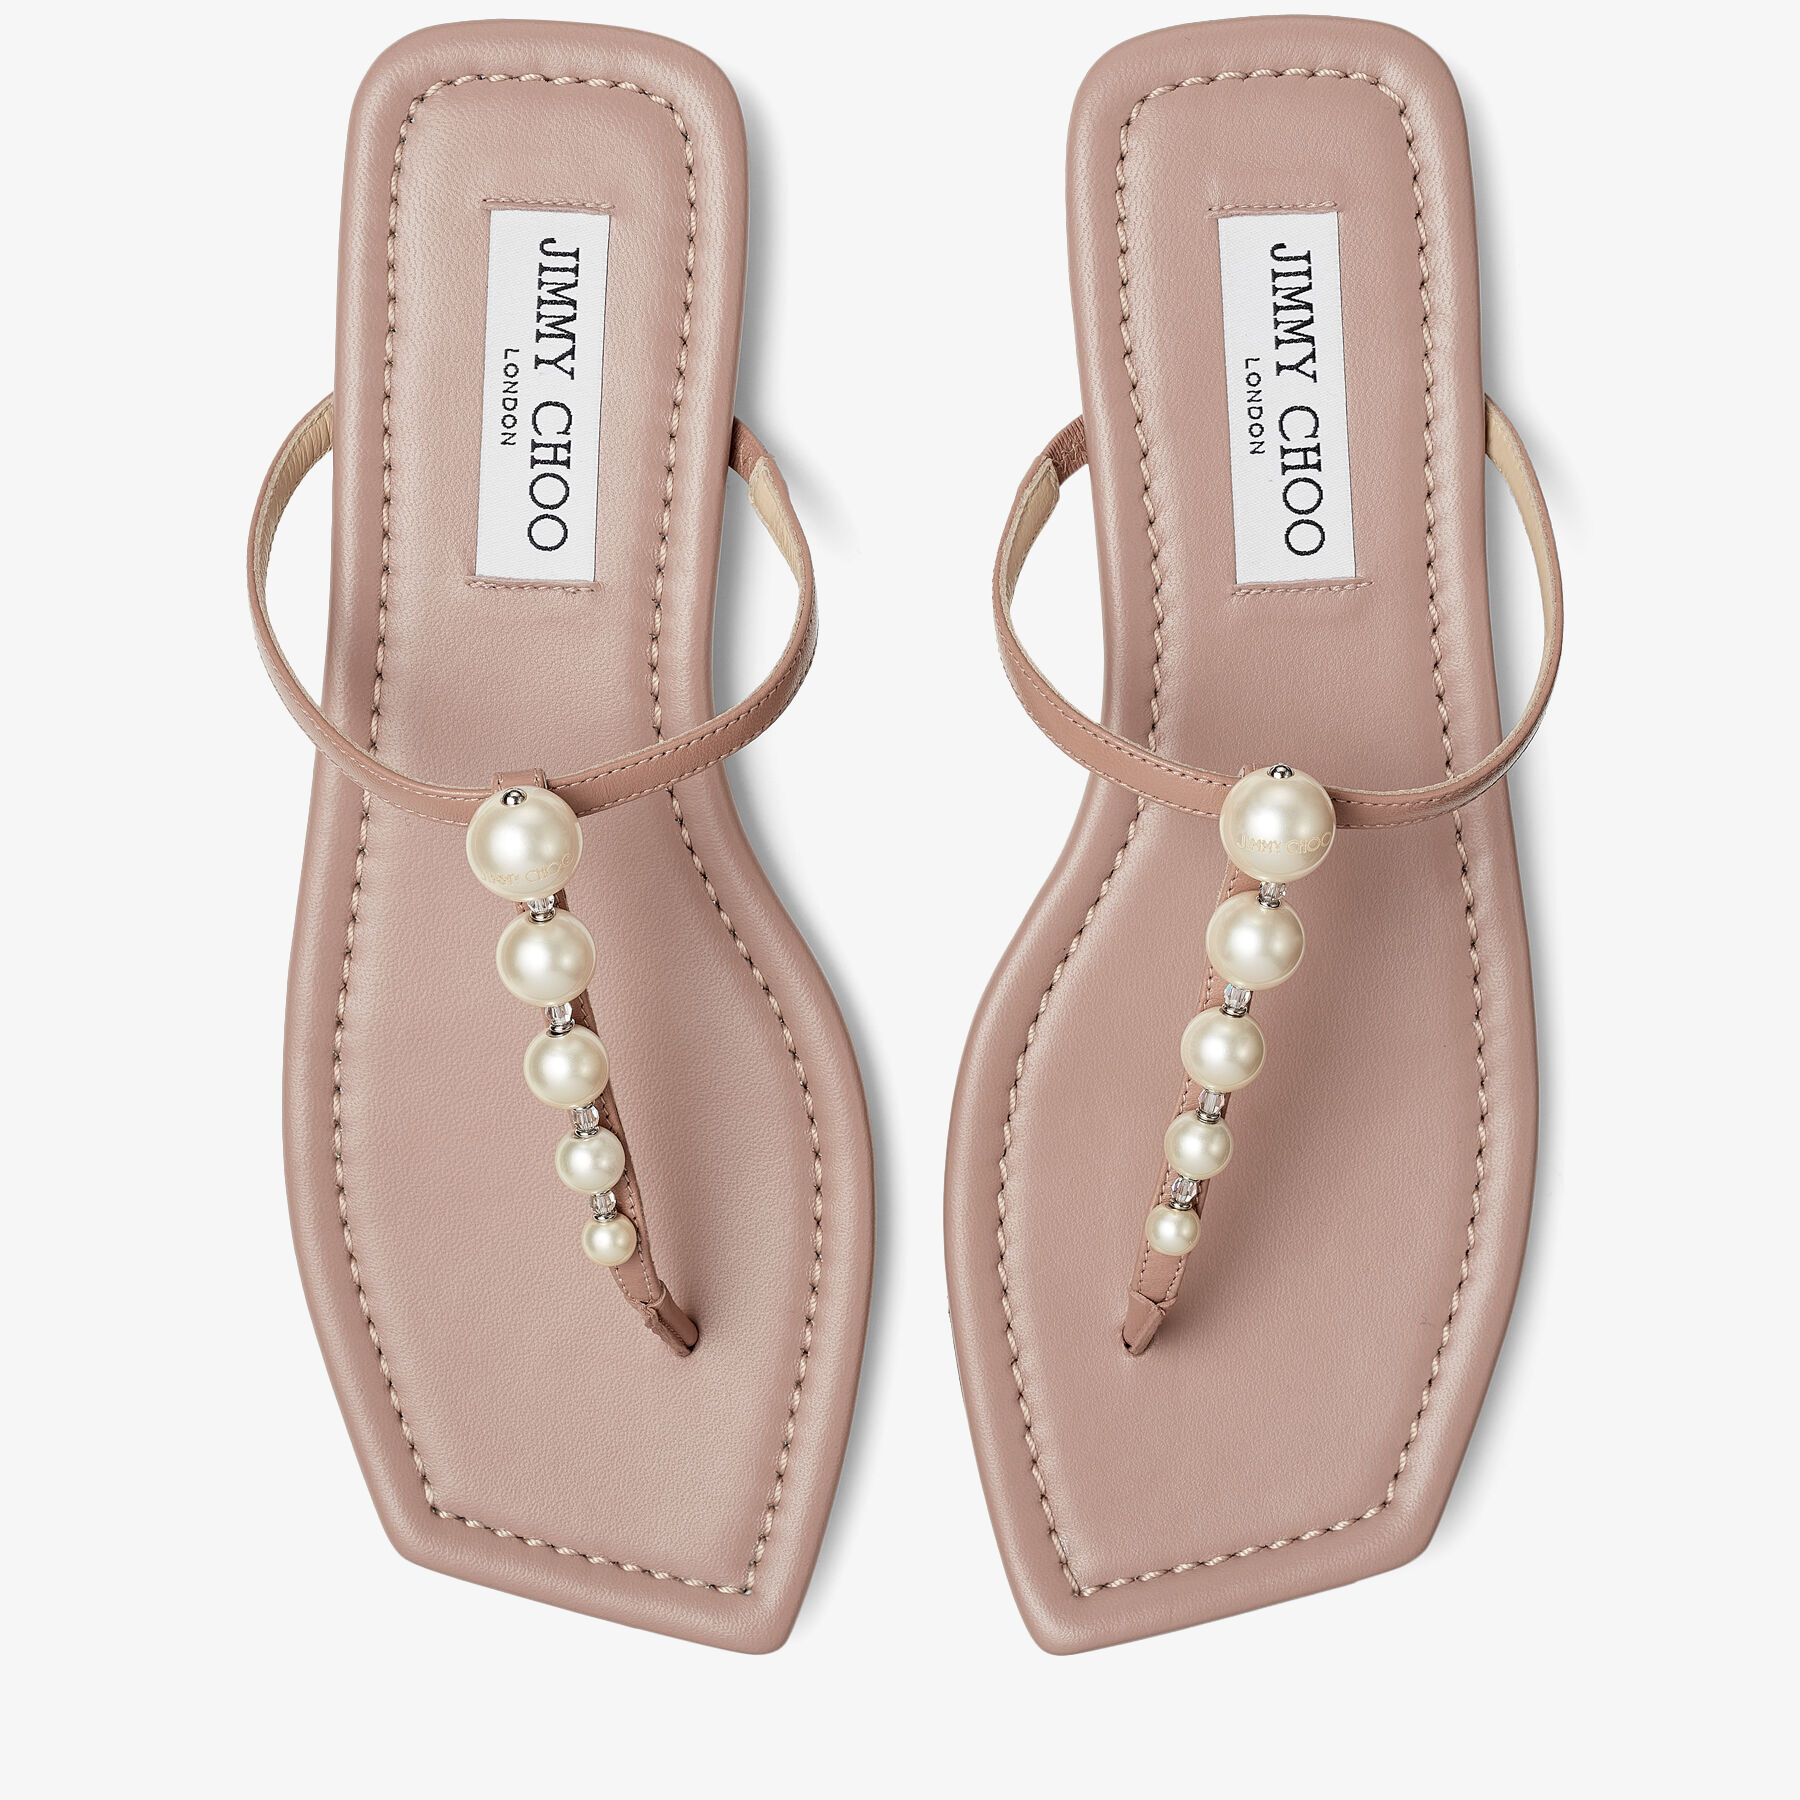 Ballet Pink Nappa Leather Flats with Pearl Embellishment | ALAINA 